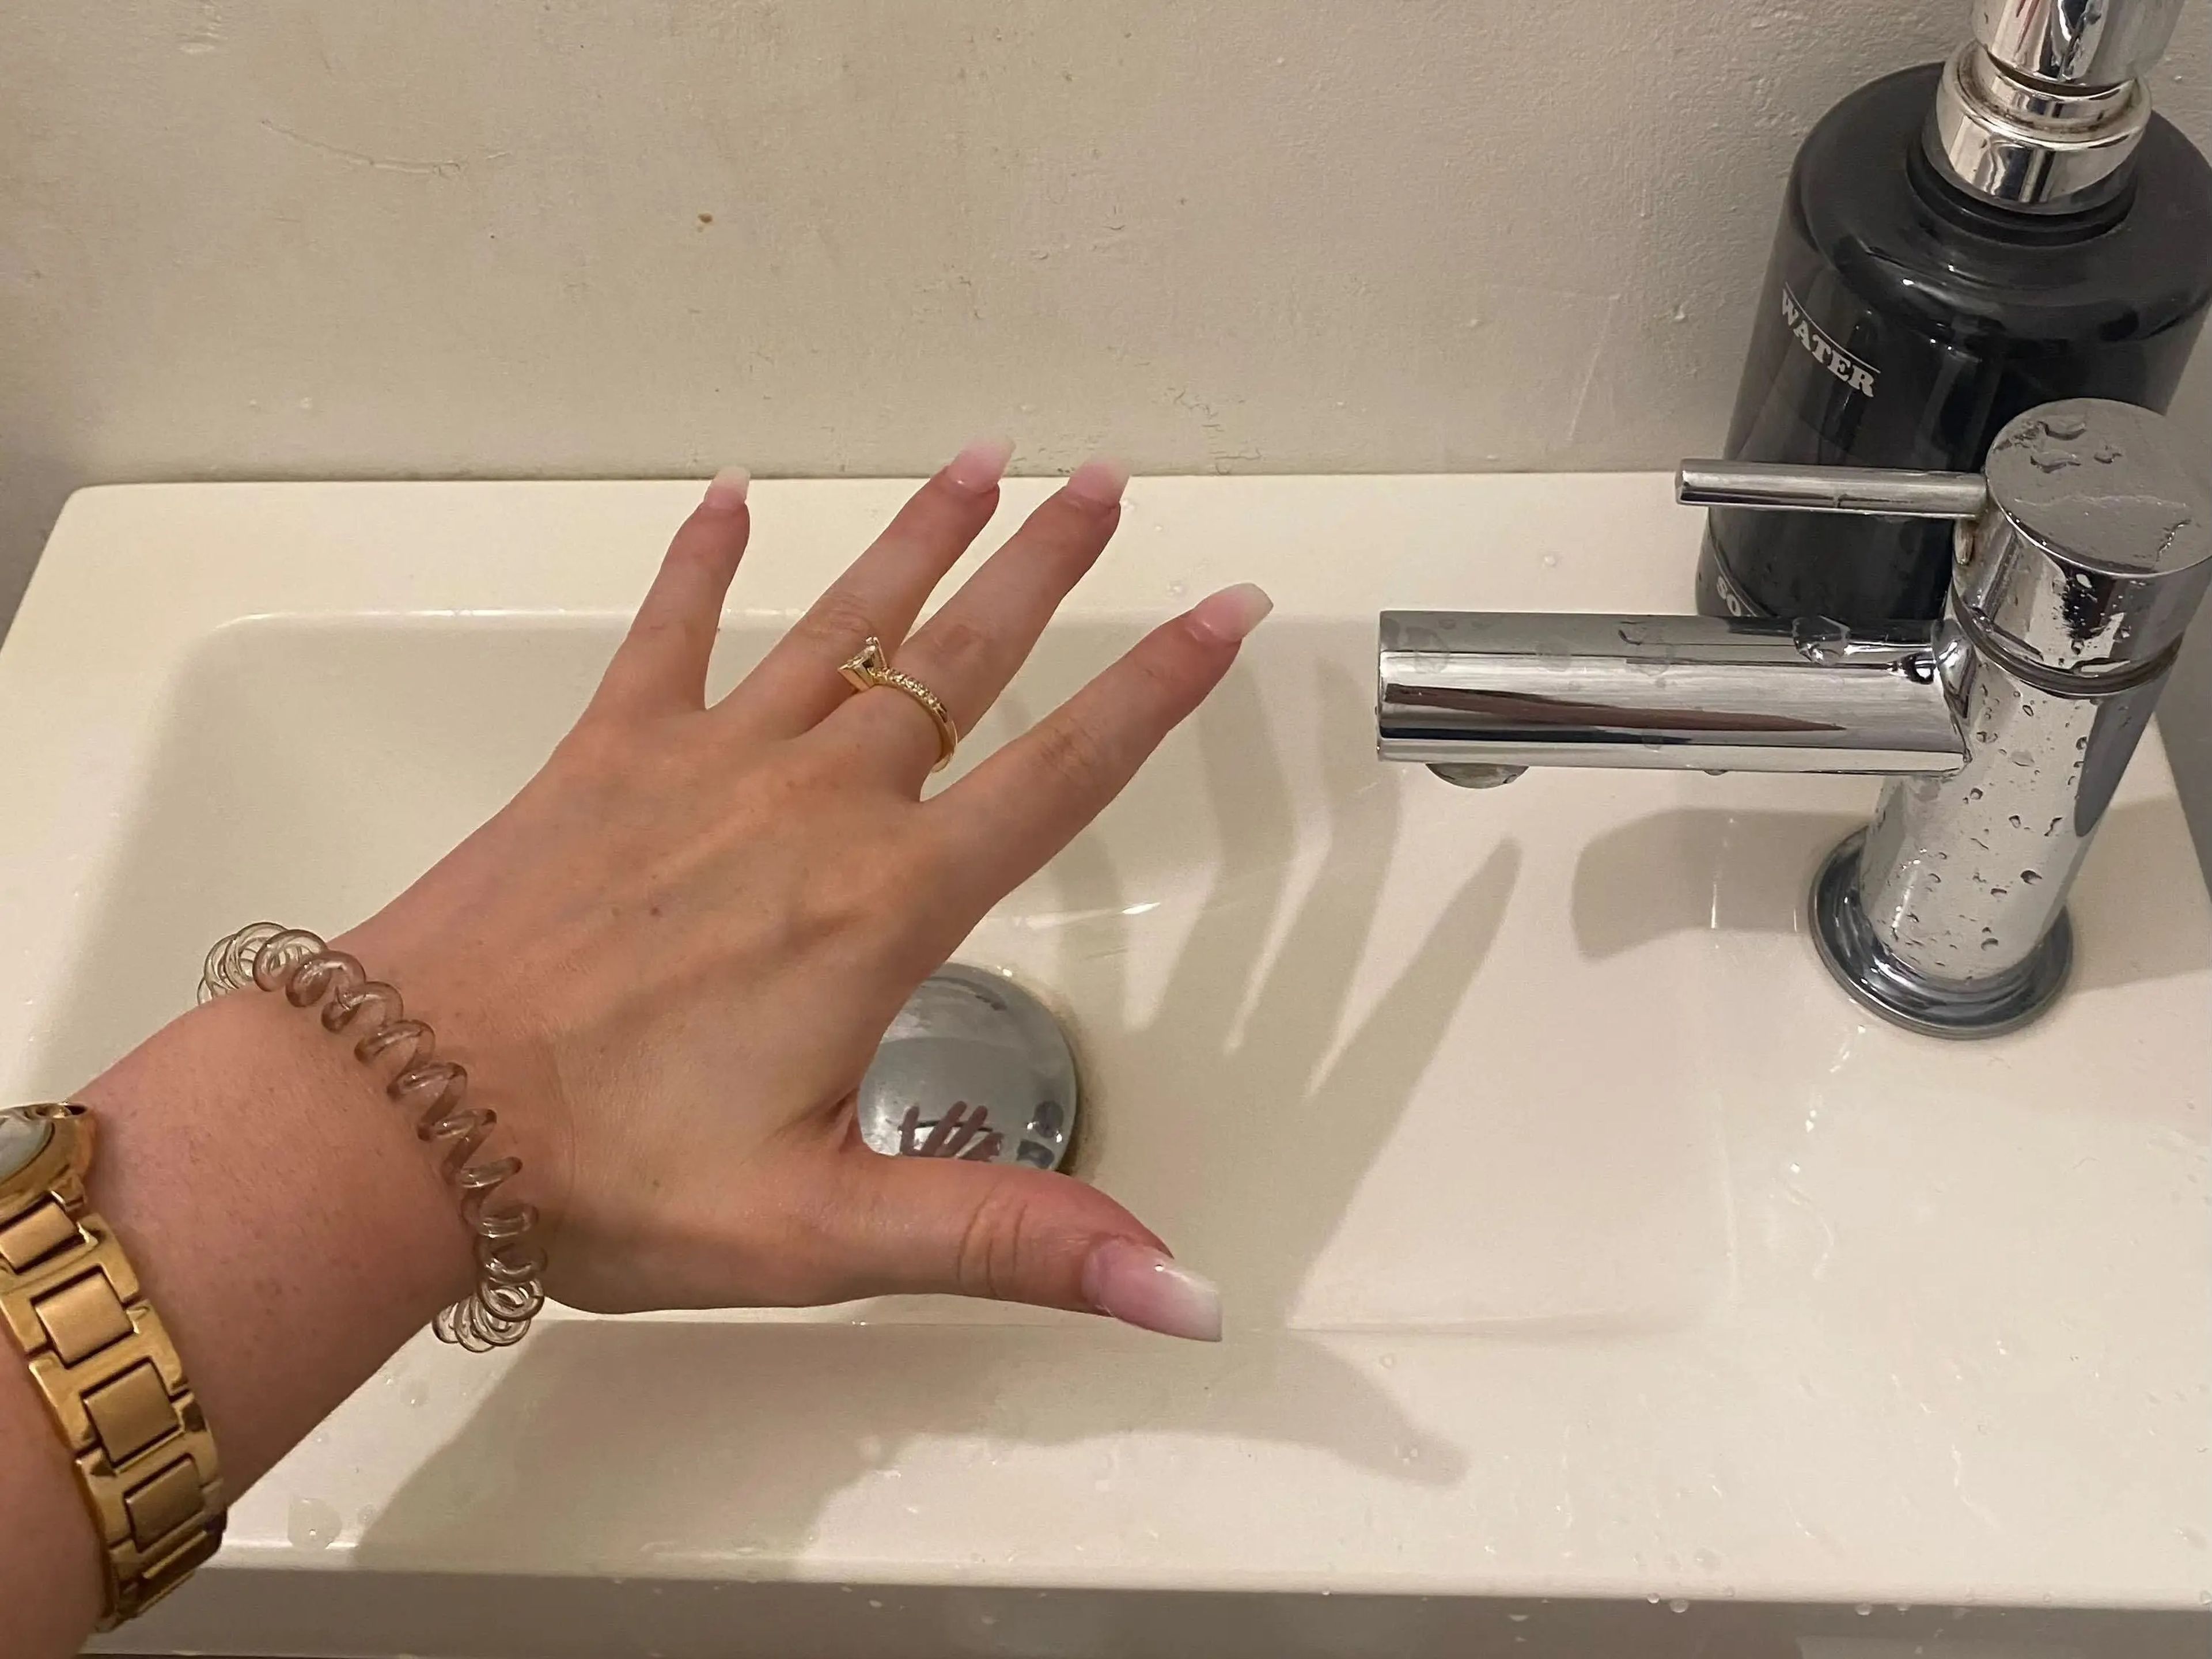 A hand being held over a sink.